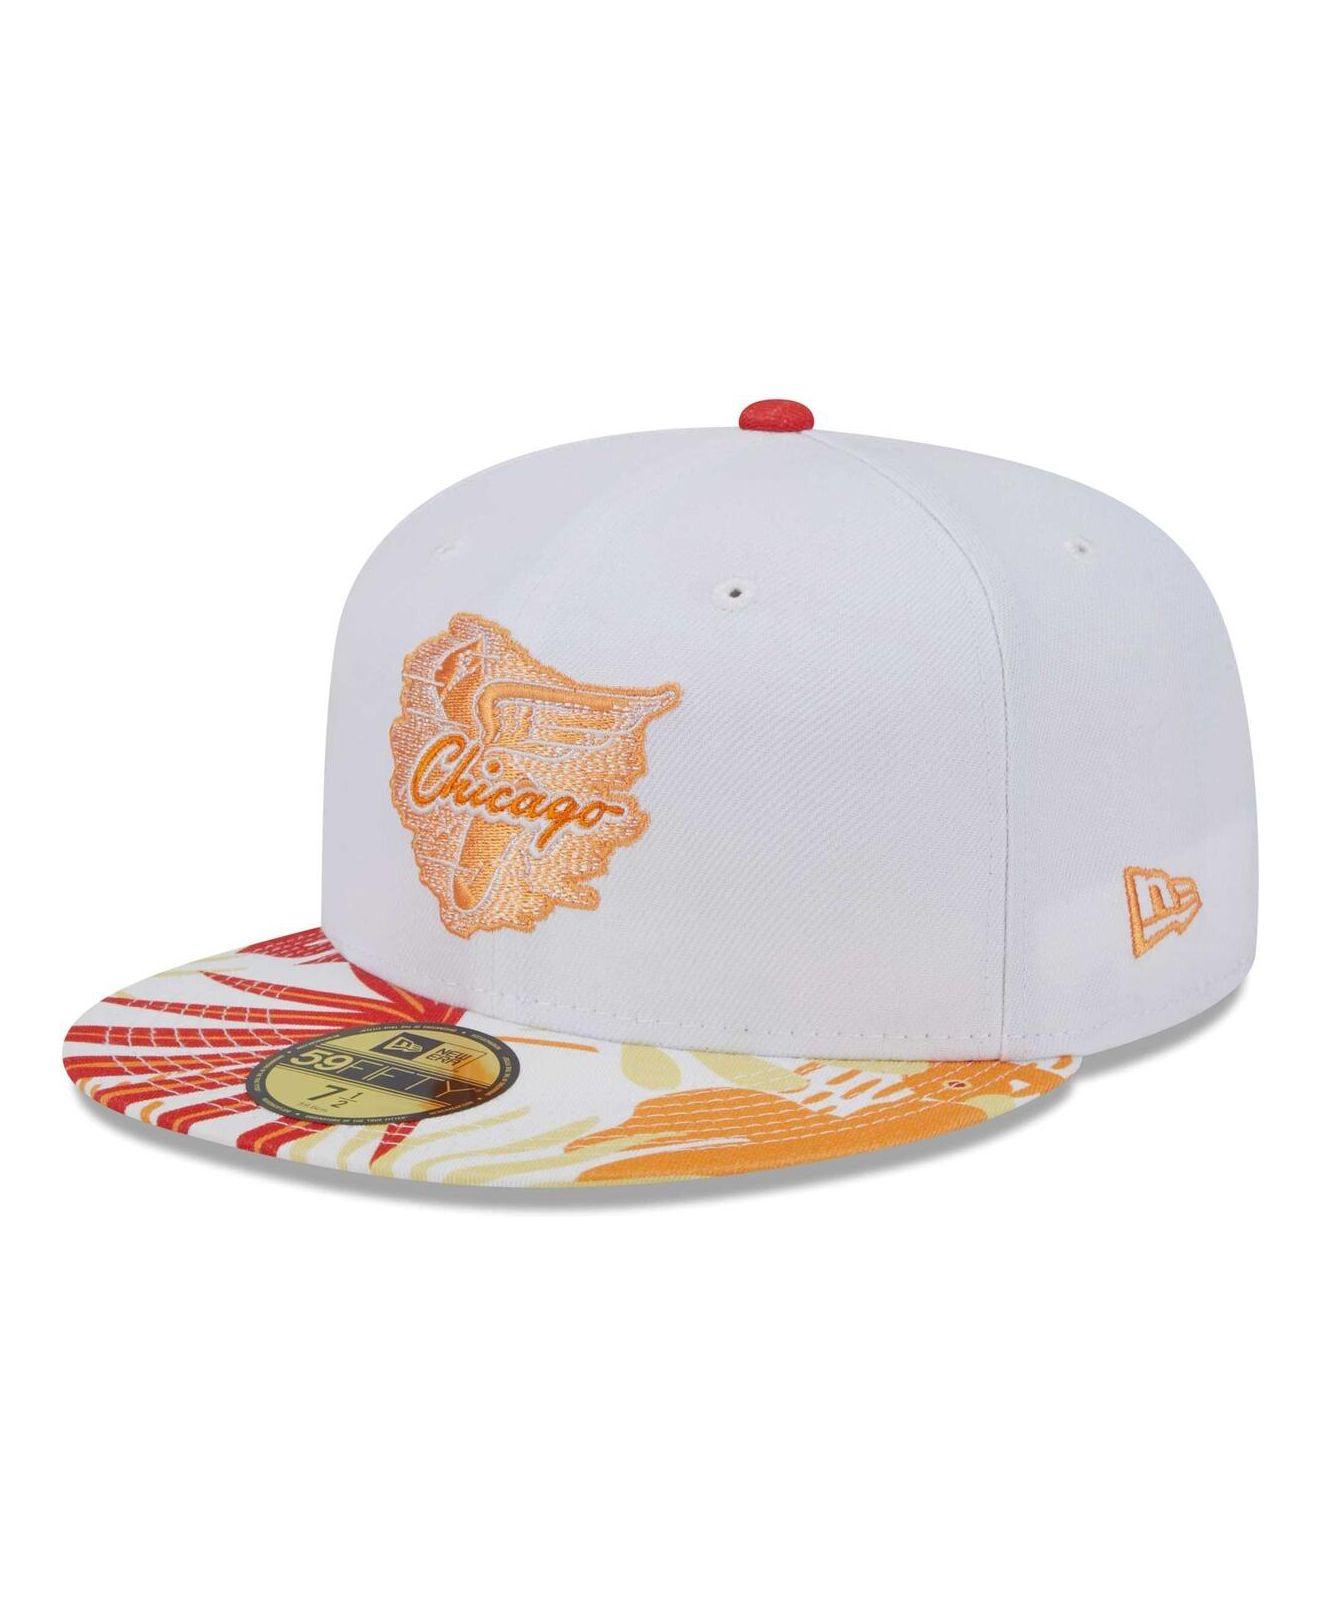 St. Louis Cardinals New Era Flamingo 59FIFTY Fitted Hat - White/Light Blue